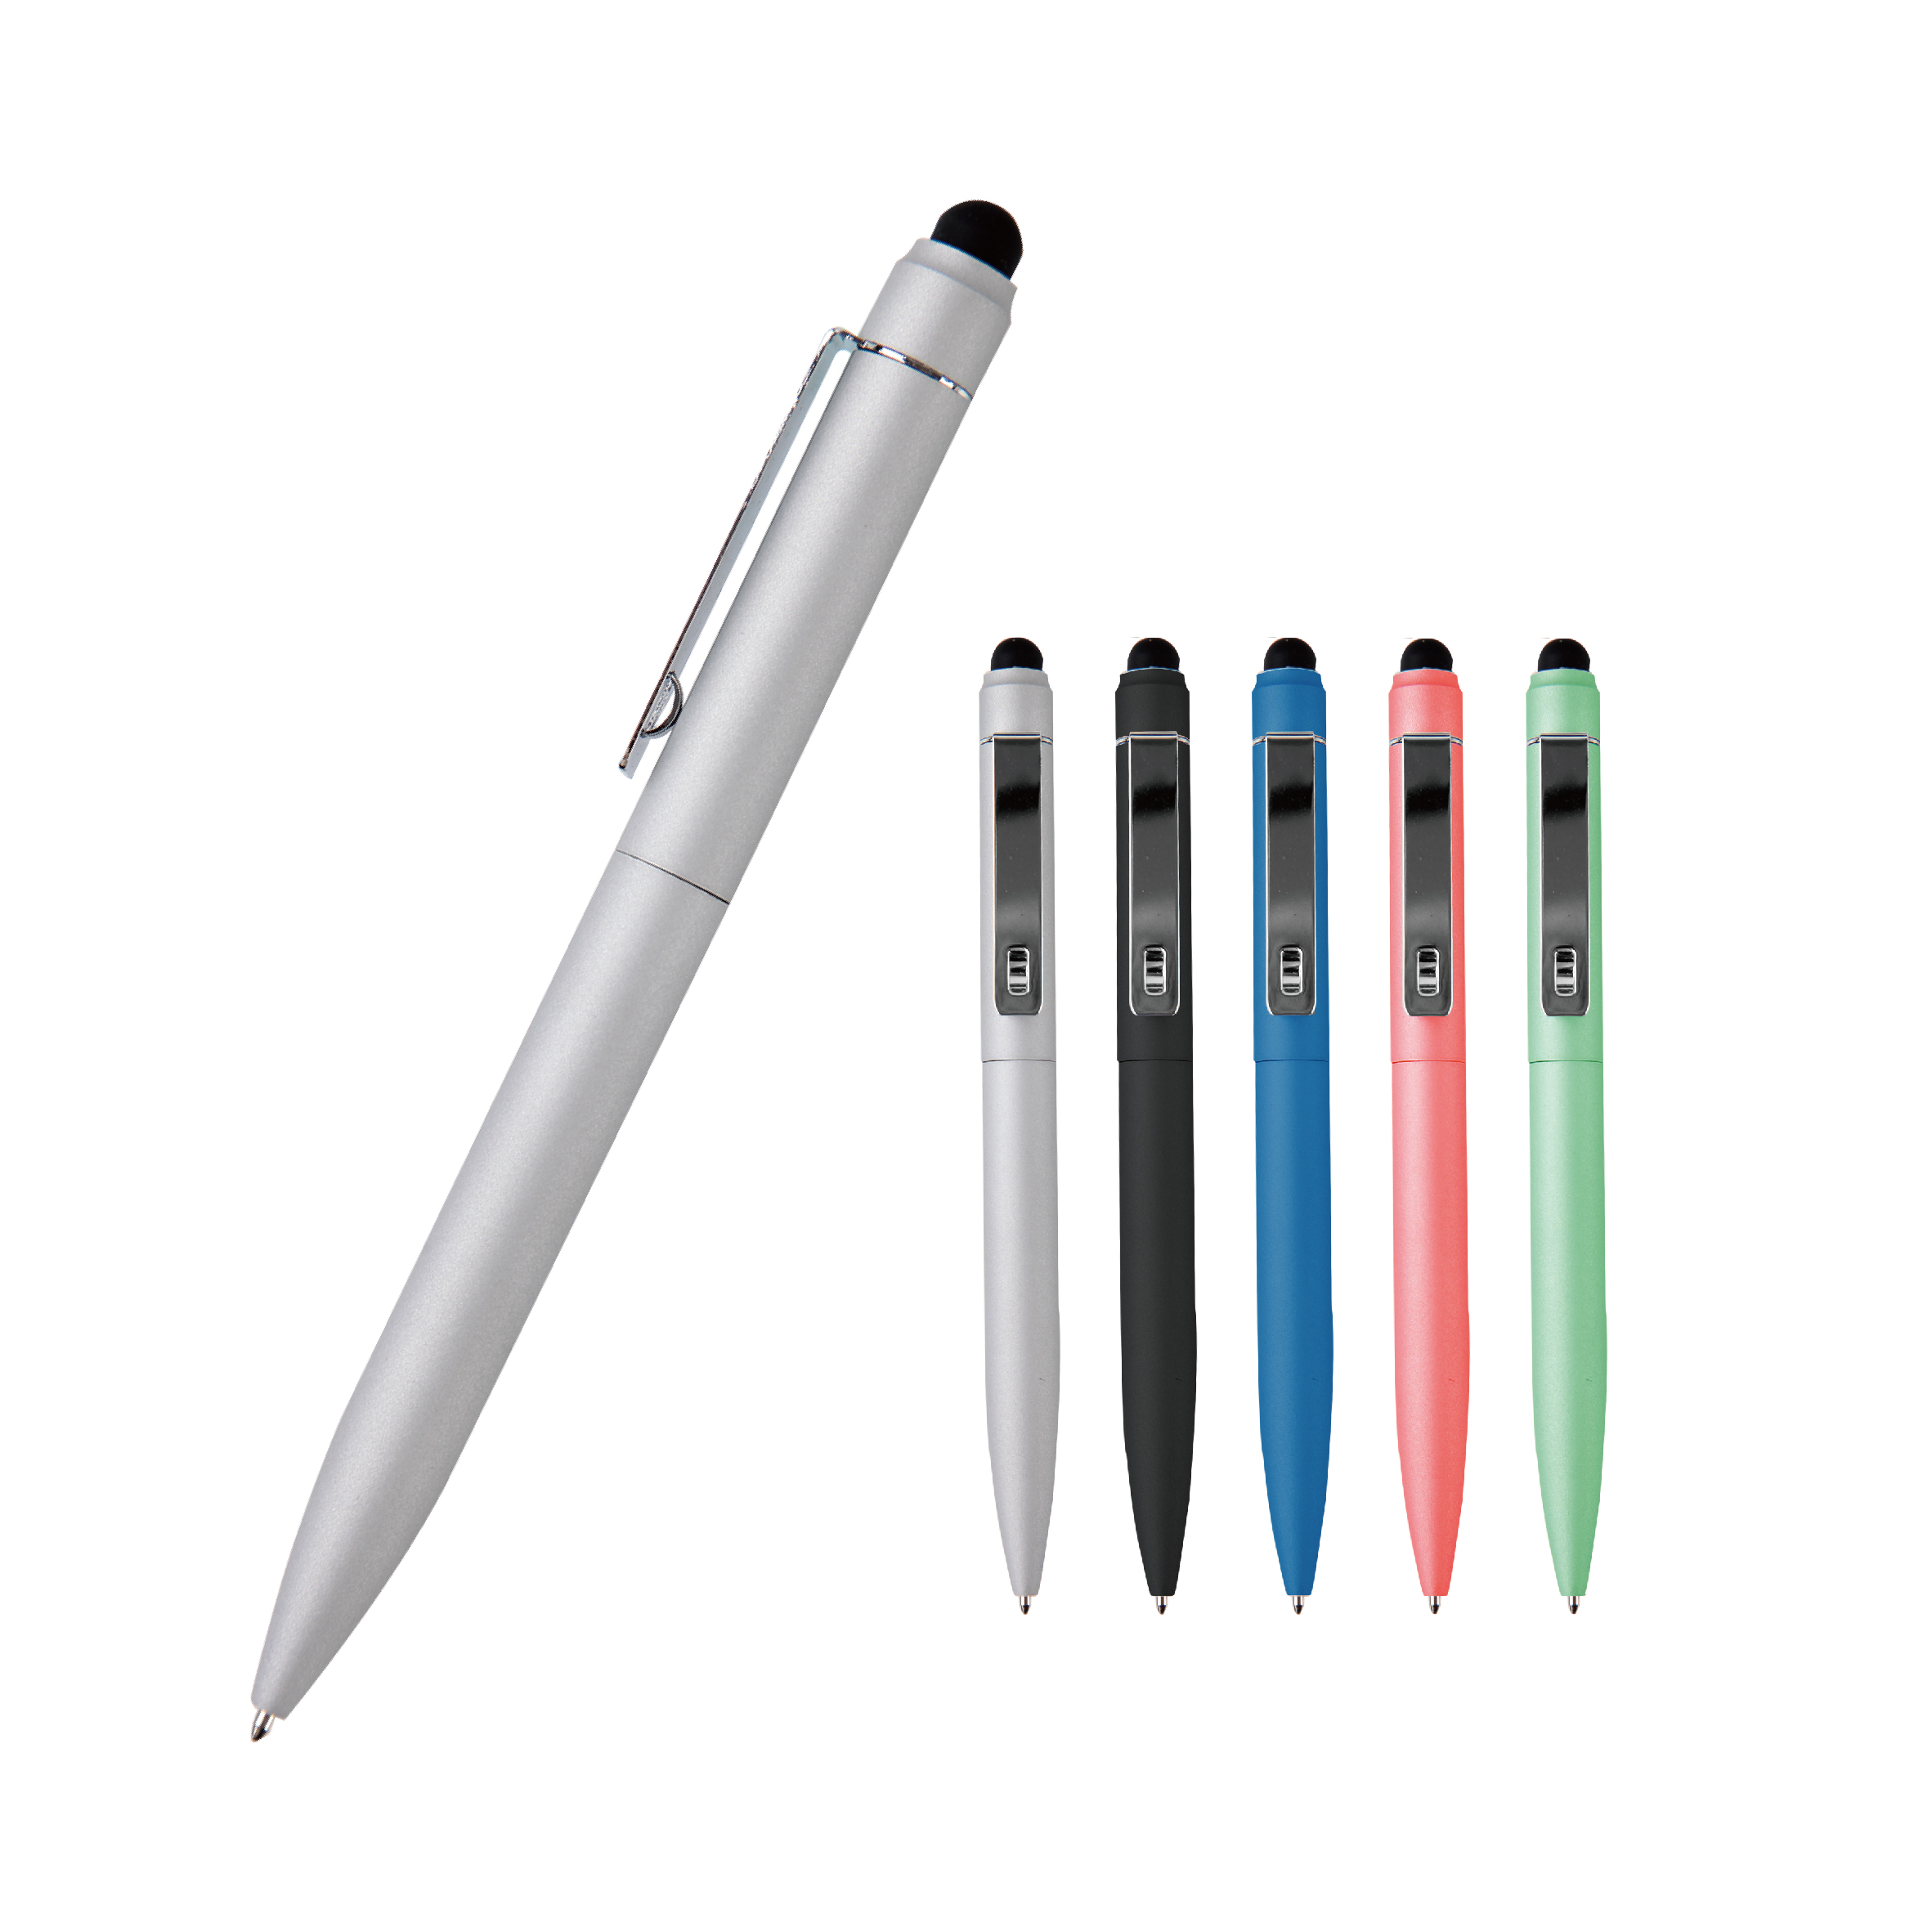 China Metal Ball Point Pen Manufacturers and Factory, Suppliers